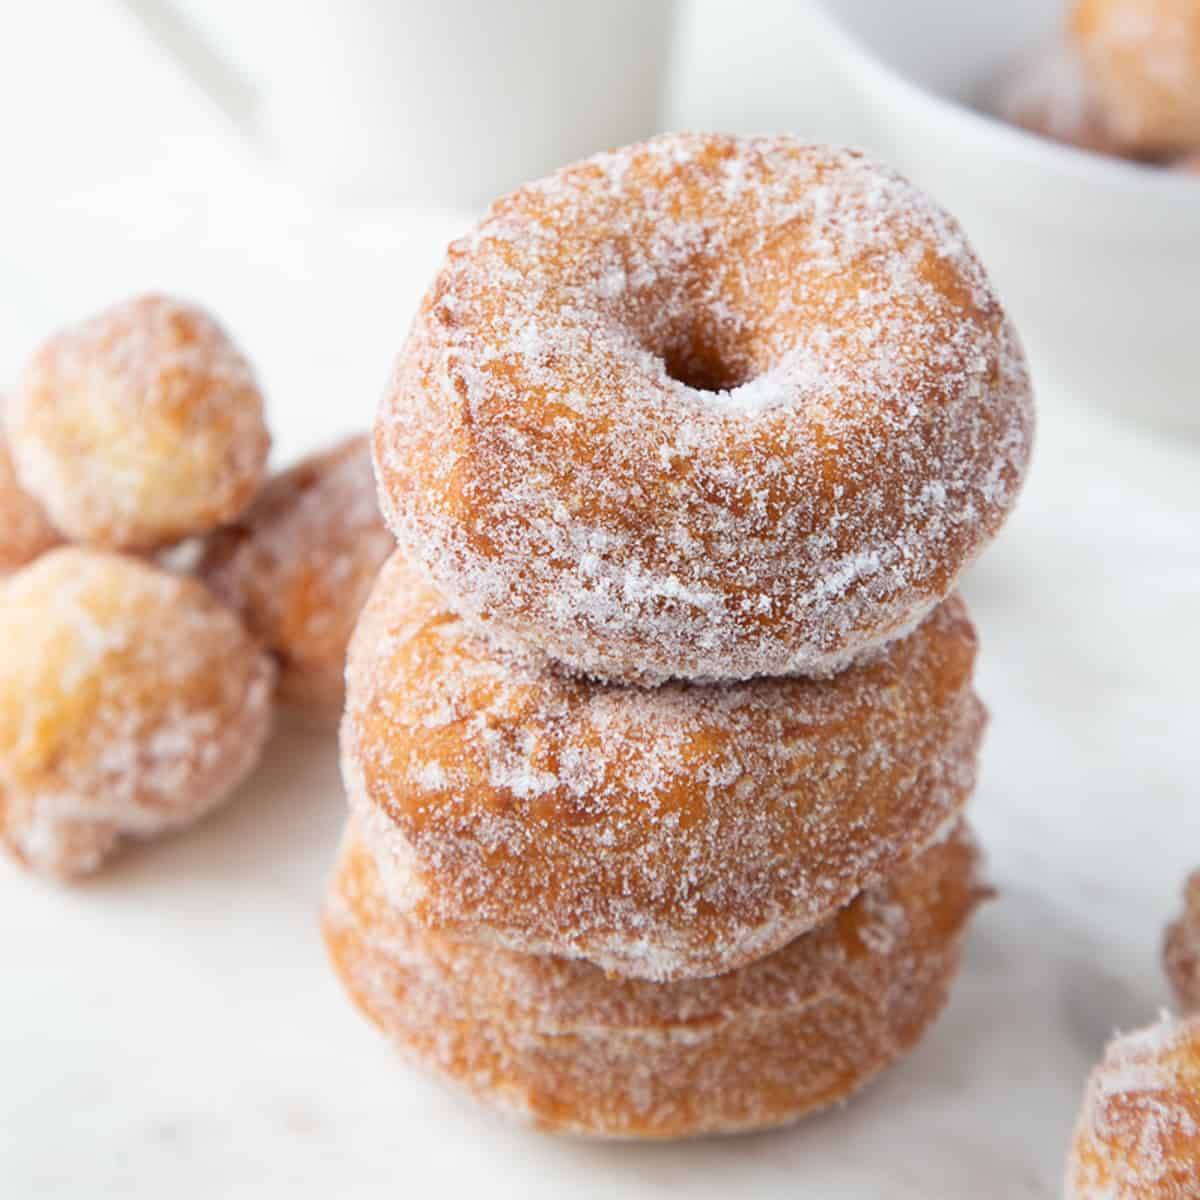 three biscuit donuts rolled in sugar and stacked on top of one another.